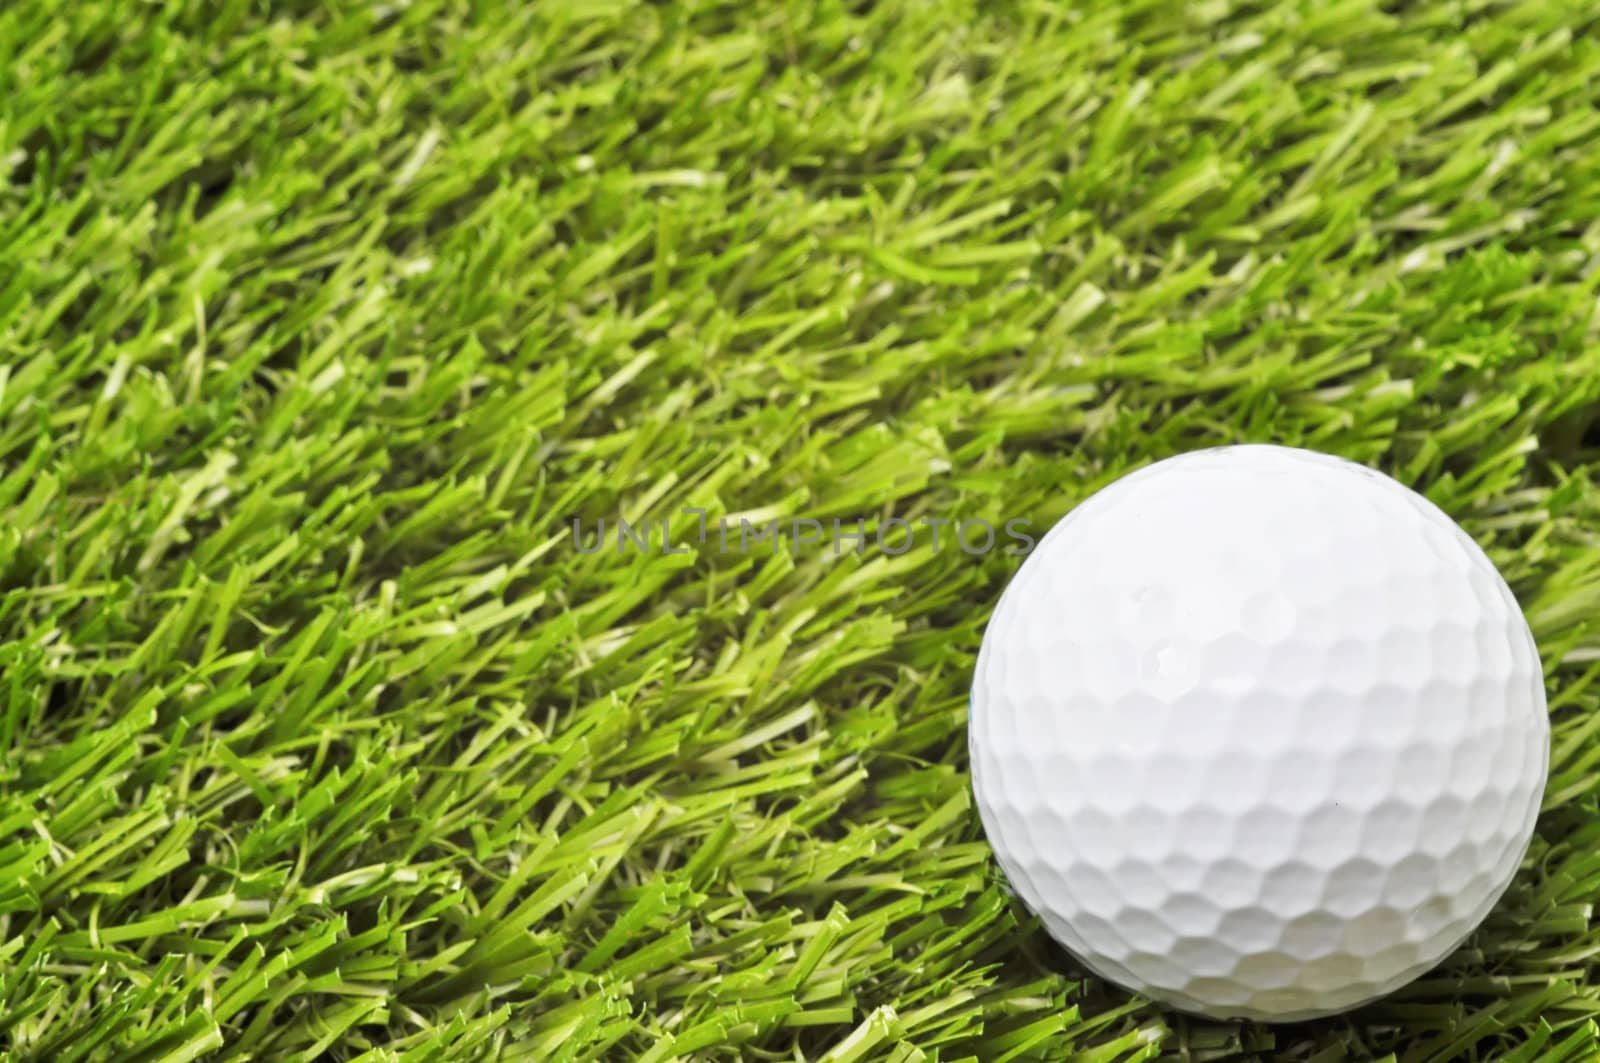 Closeup of golf ball  on grass with copy space.